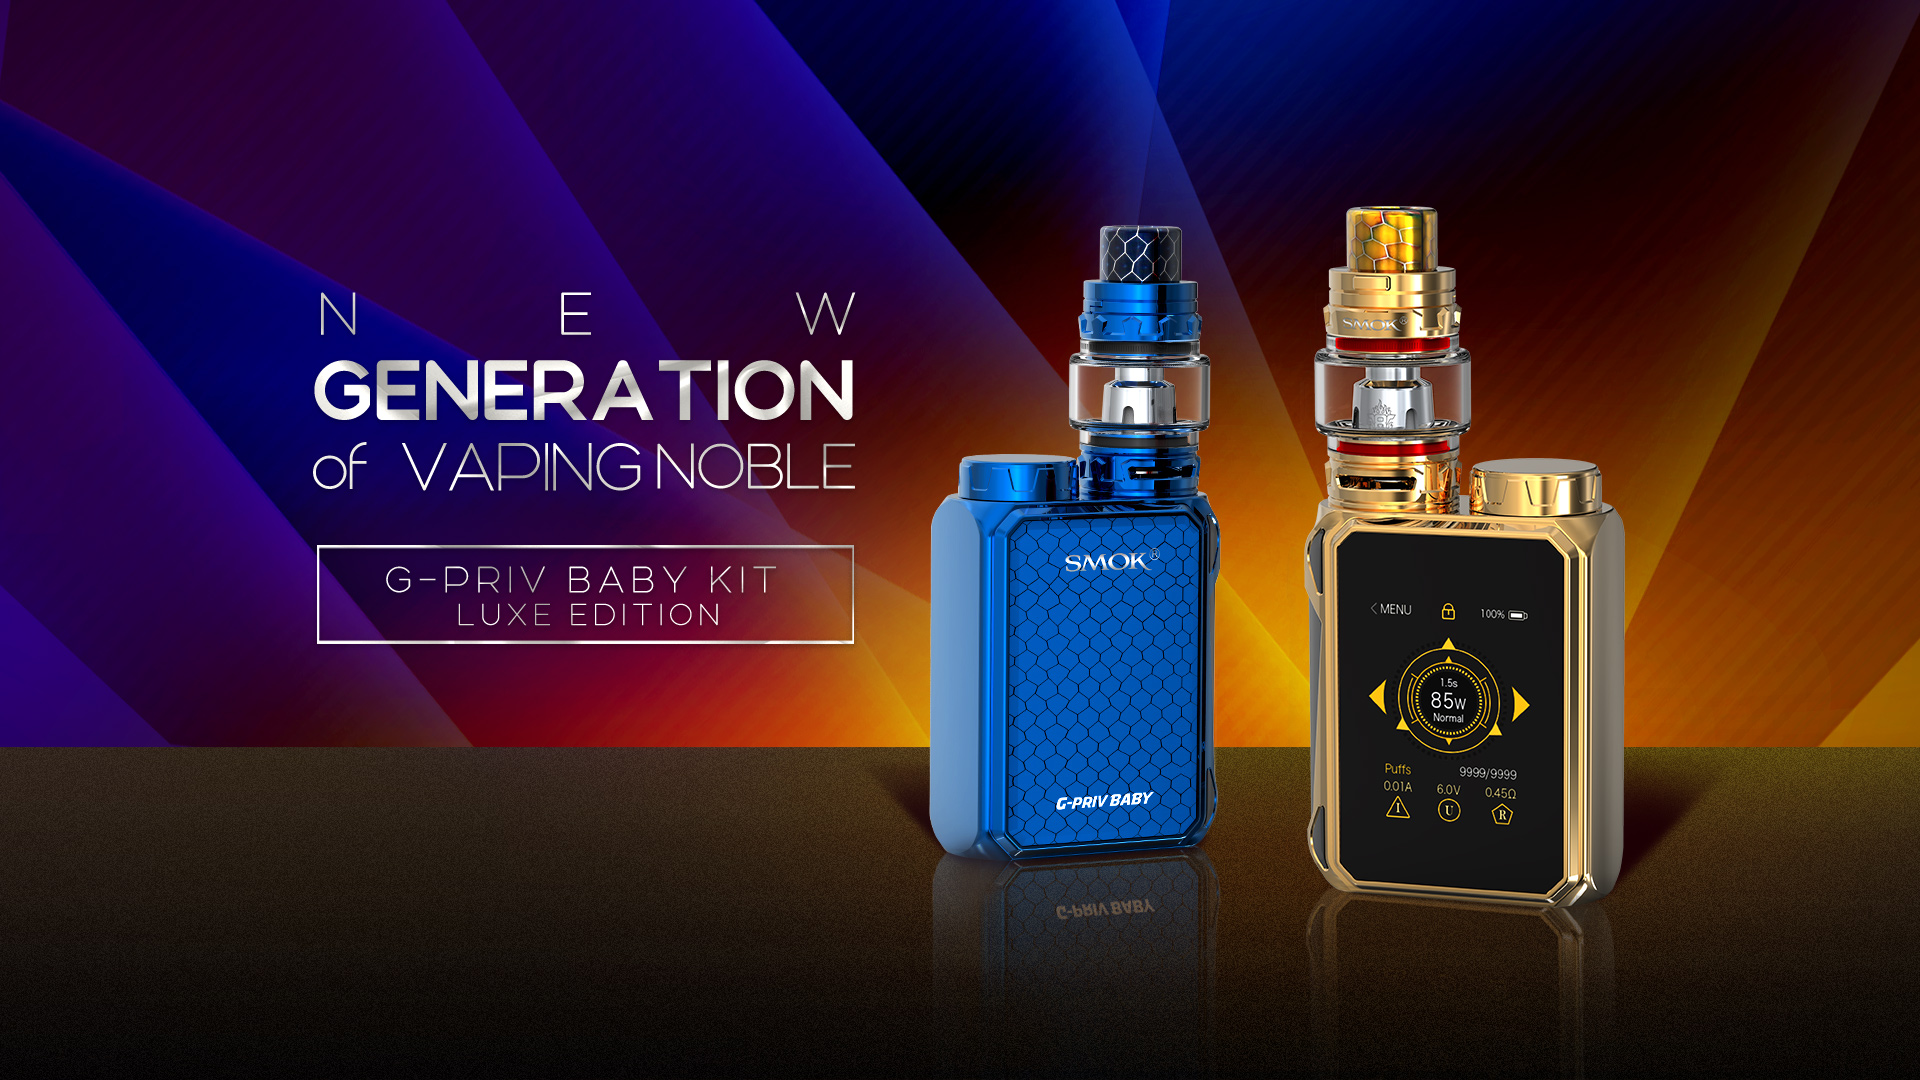 New Generation of Vaping Noble - SMOK G-Priv Baby Luxe Edition 